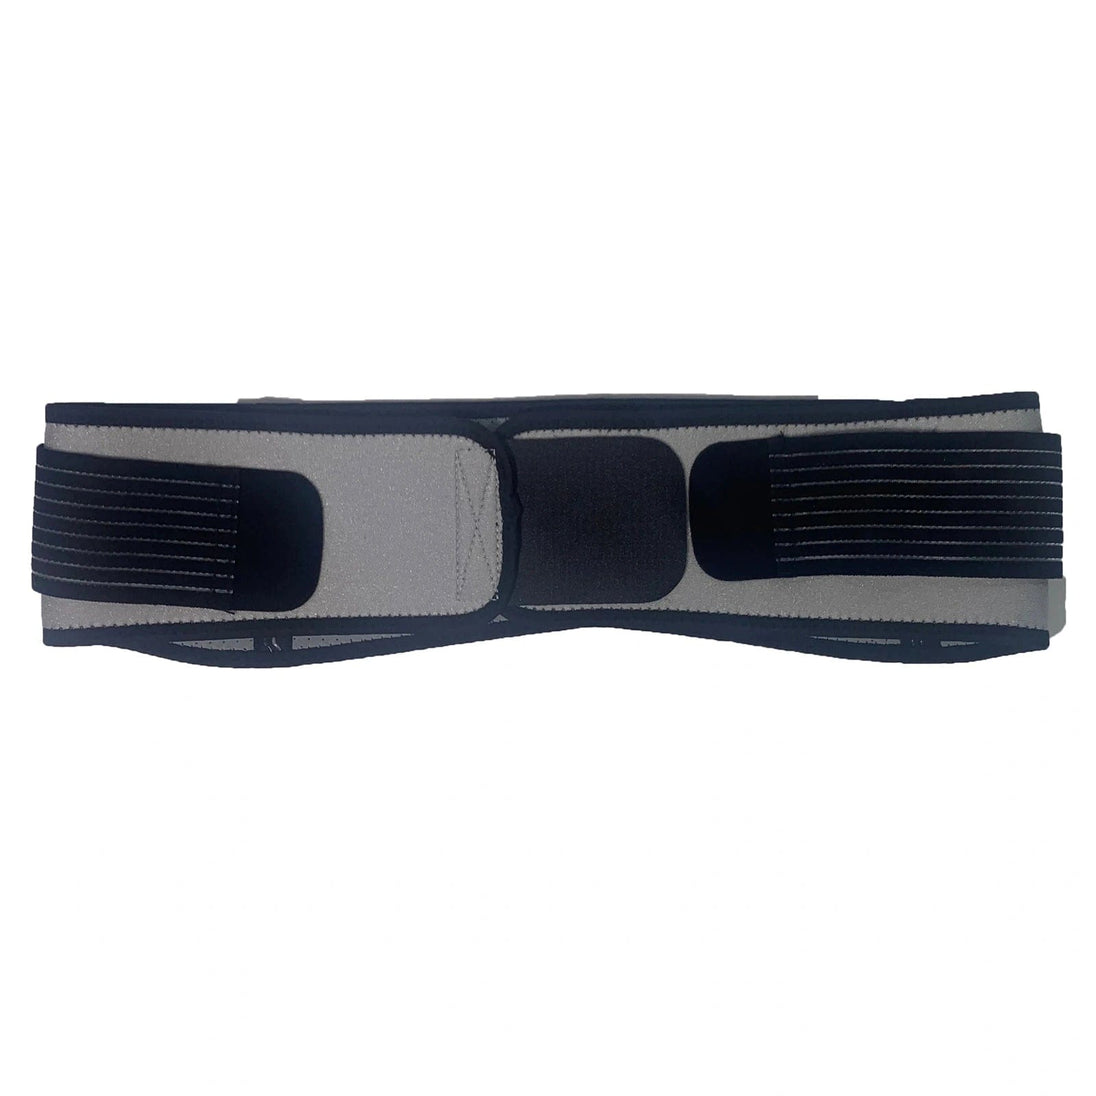 Empower Your Back: Sacroiliac Hip Belt - Your Solution to Nerve Compression and Lumbar Comfort